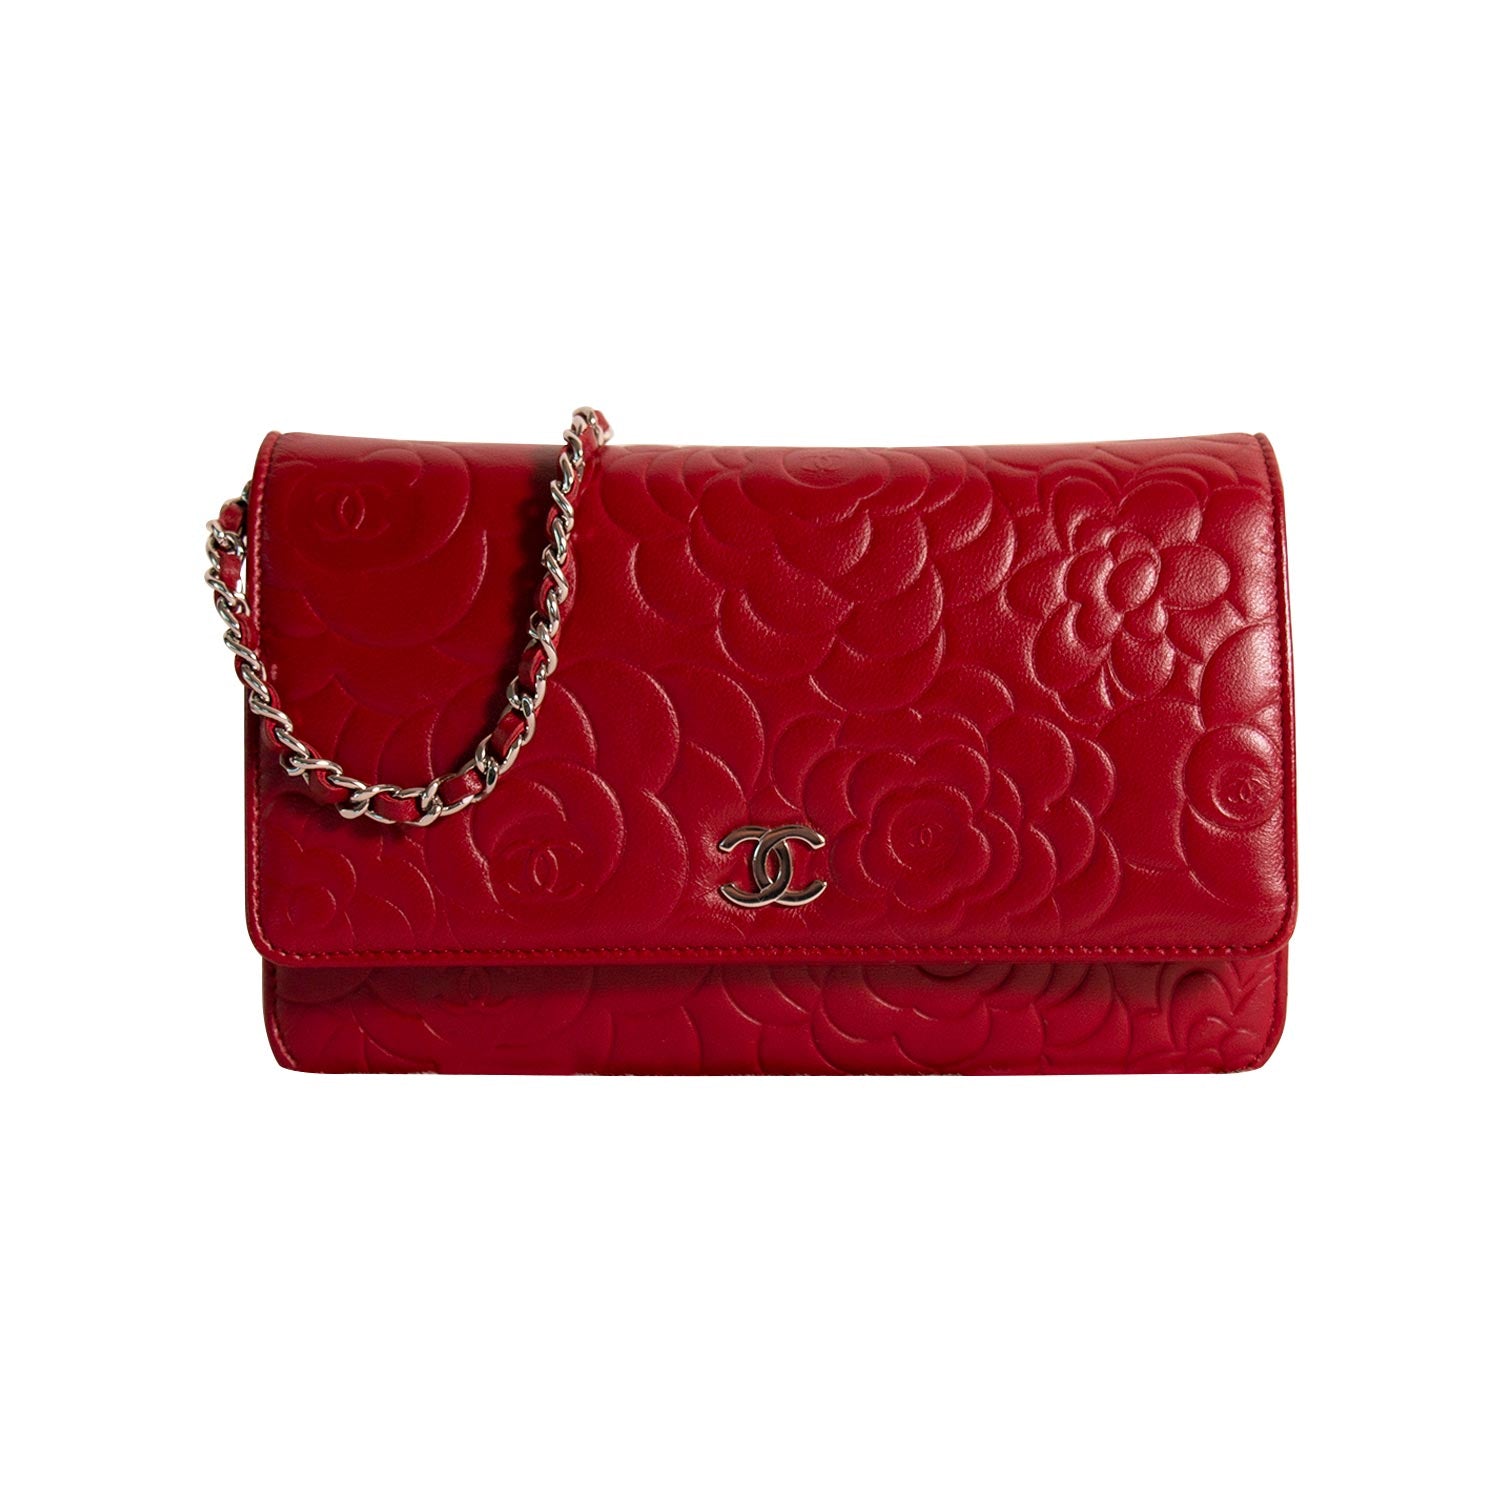 CHANEL, Bags, Chanel Camellia Palette Wallet Nonbrand Wristlet Or  Crossbody Chain